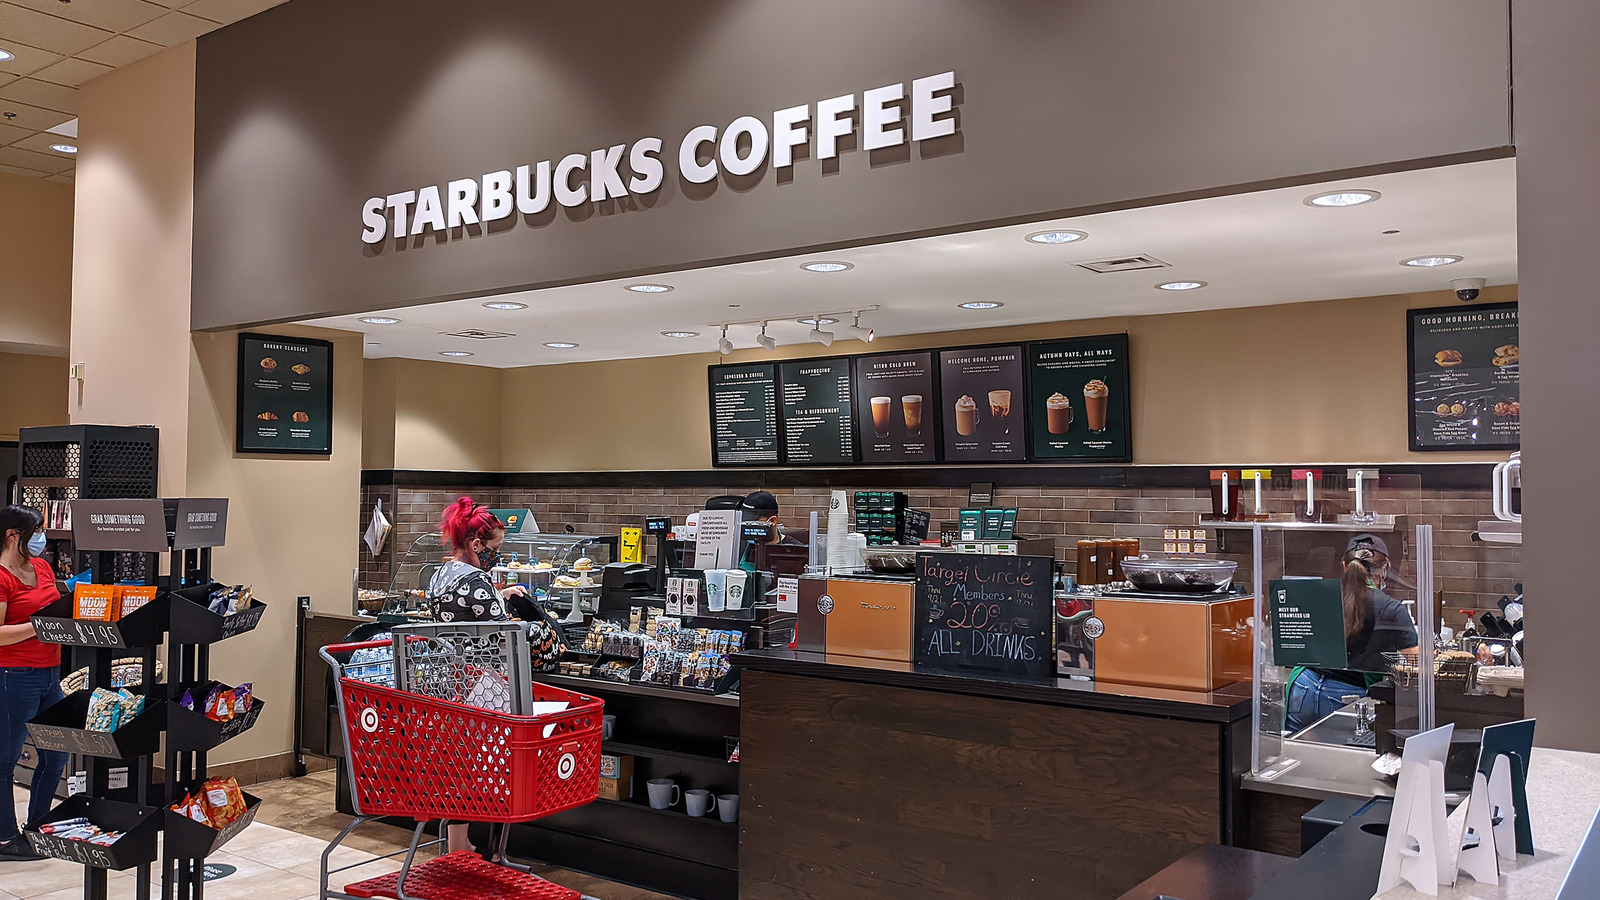 https://www.thedailymeal.com/img/gallery/it-turns-out-that-target-starbucks-locations-dont-count-as-real-starbucks/l-intro-1676820197.jpg